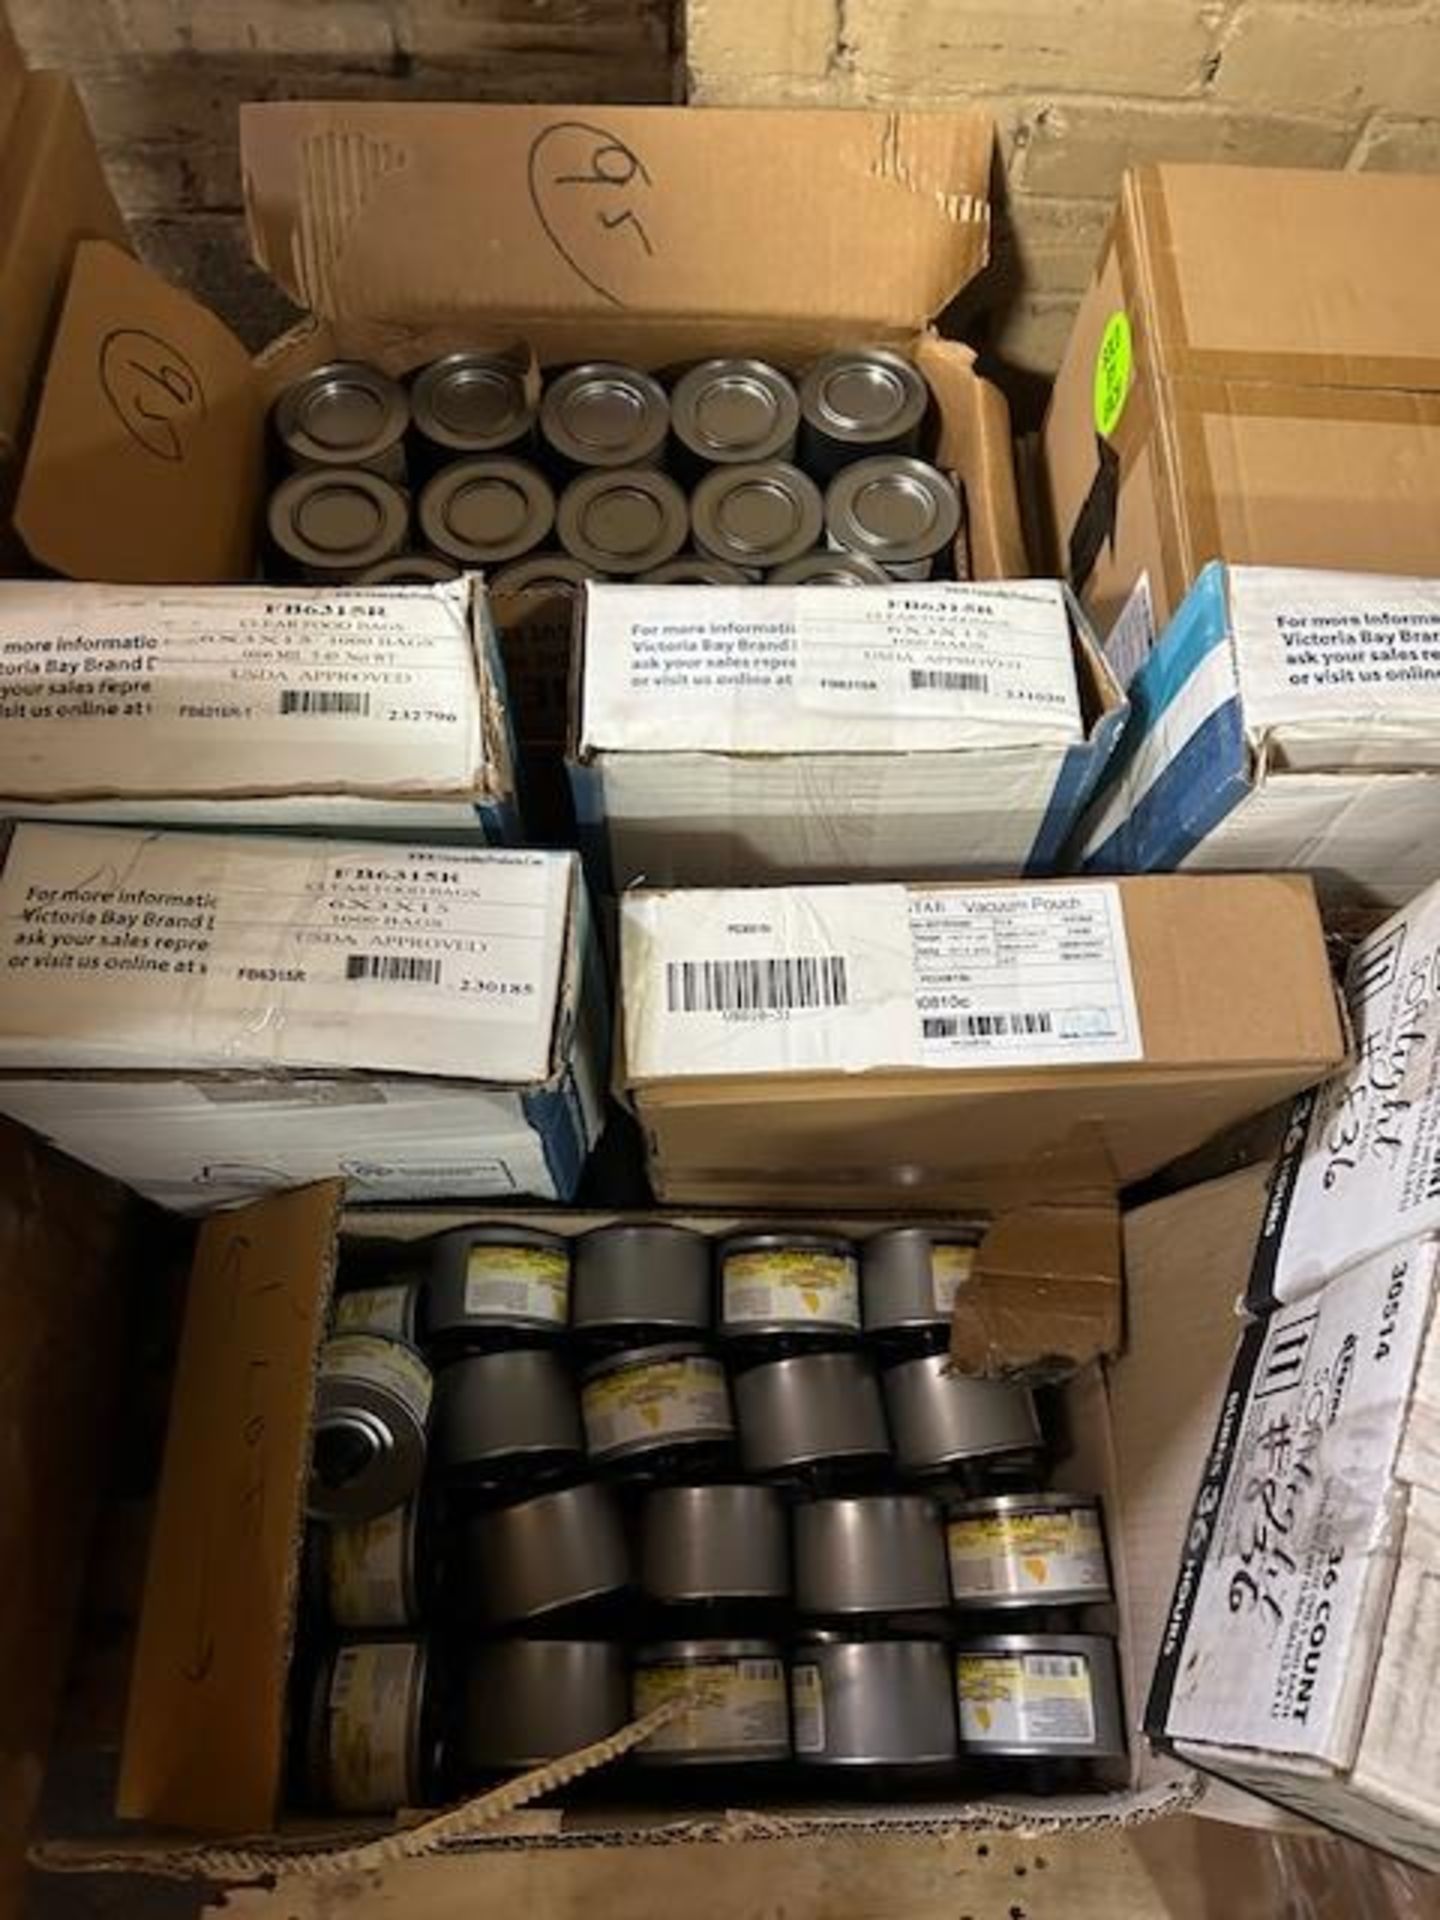 LOT - (2) Skids of Canned Fuel, Polybags, Cutlery Kits, Foil and Film - Image 2 of 4